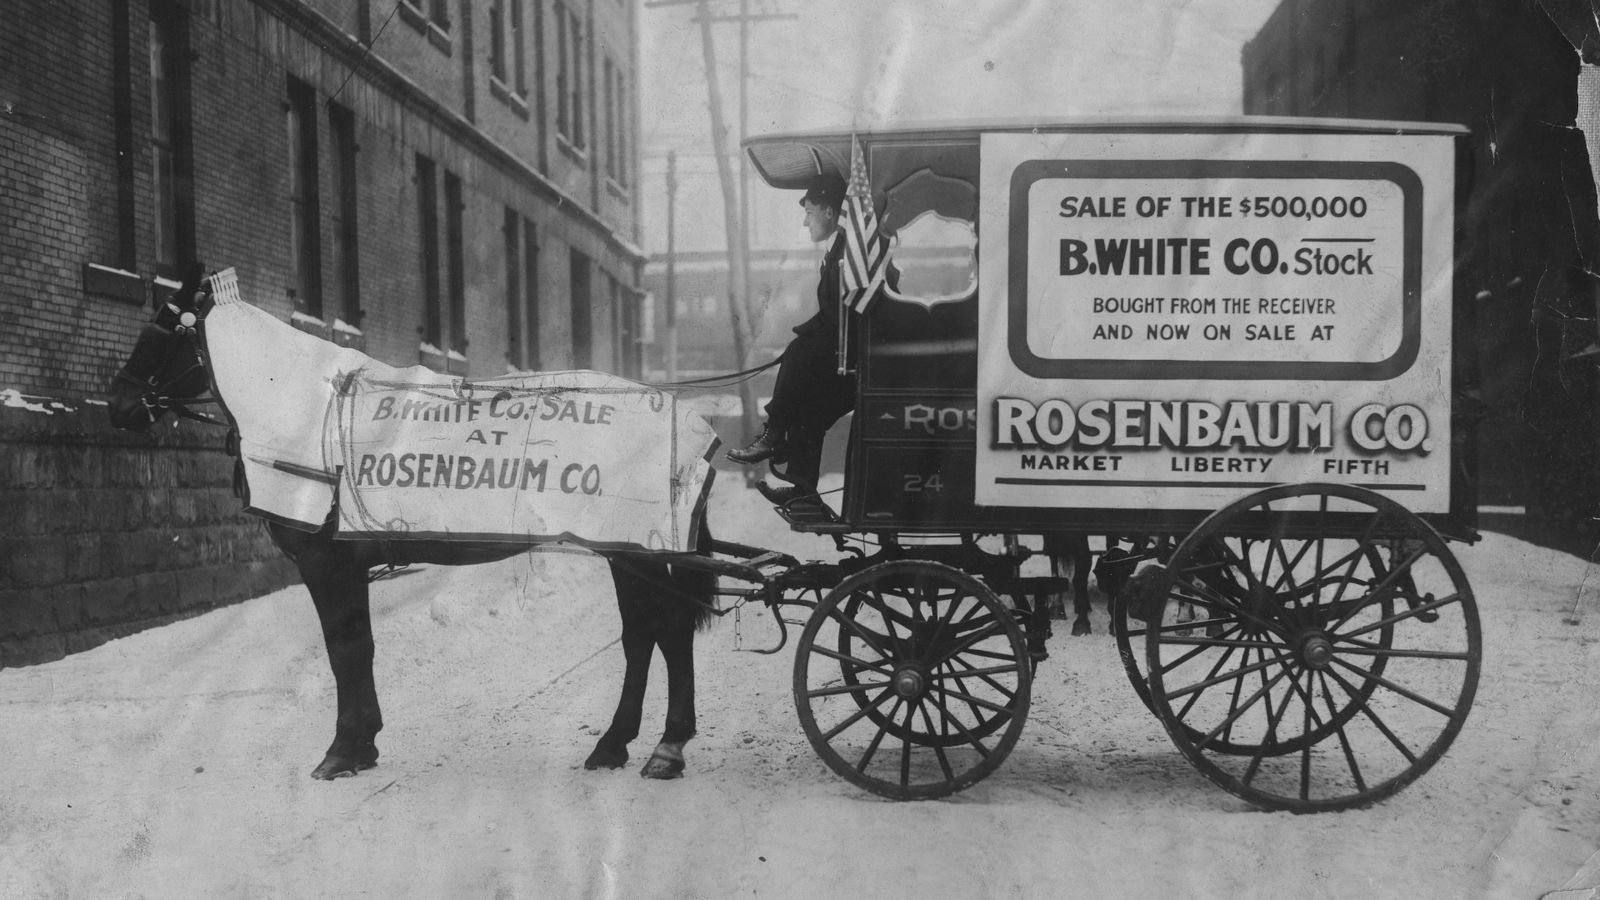 Horse-drawn wagon with driver in the snow. The horse and the wagon are adorned with signage advertising a stock clearance sale.